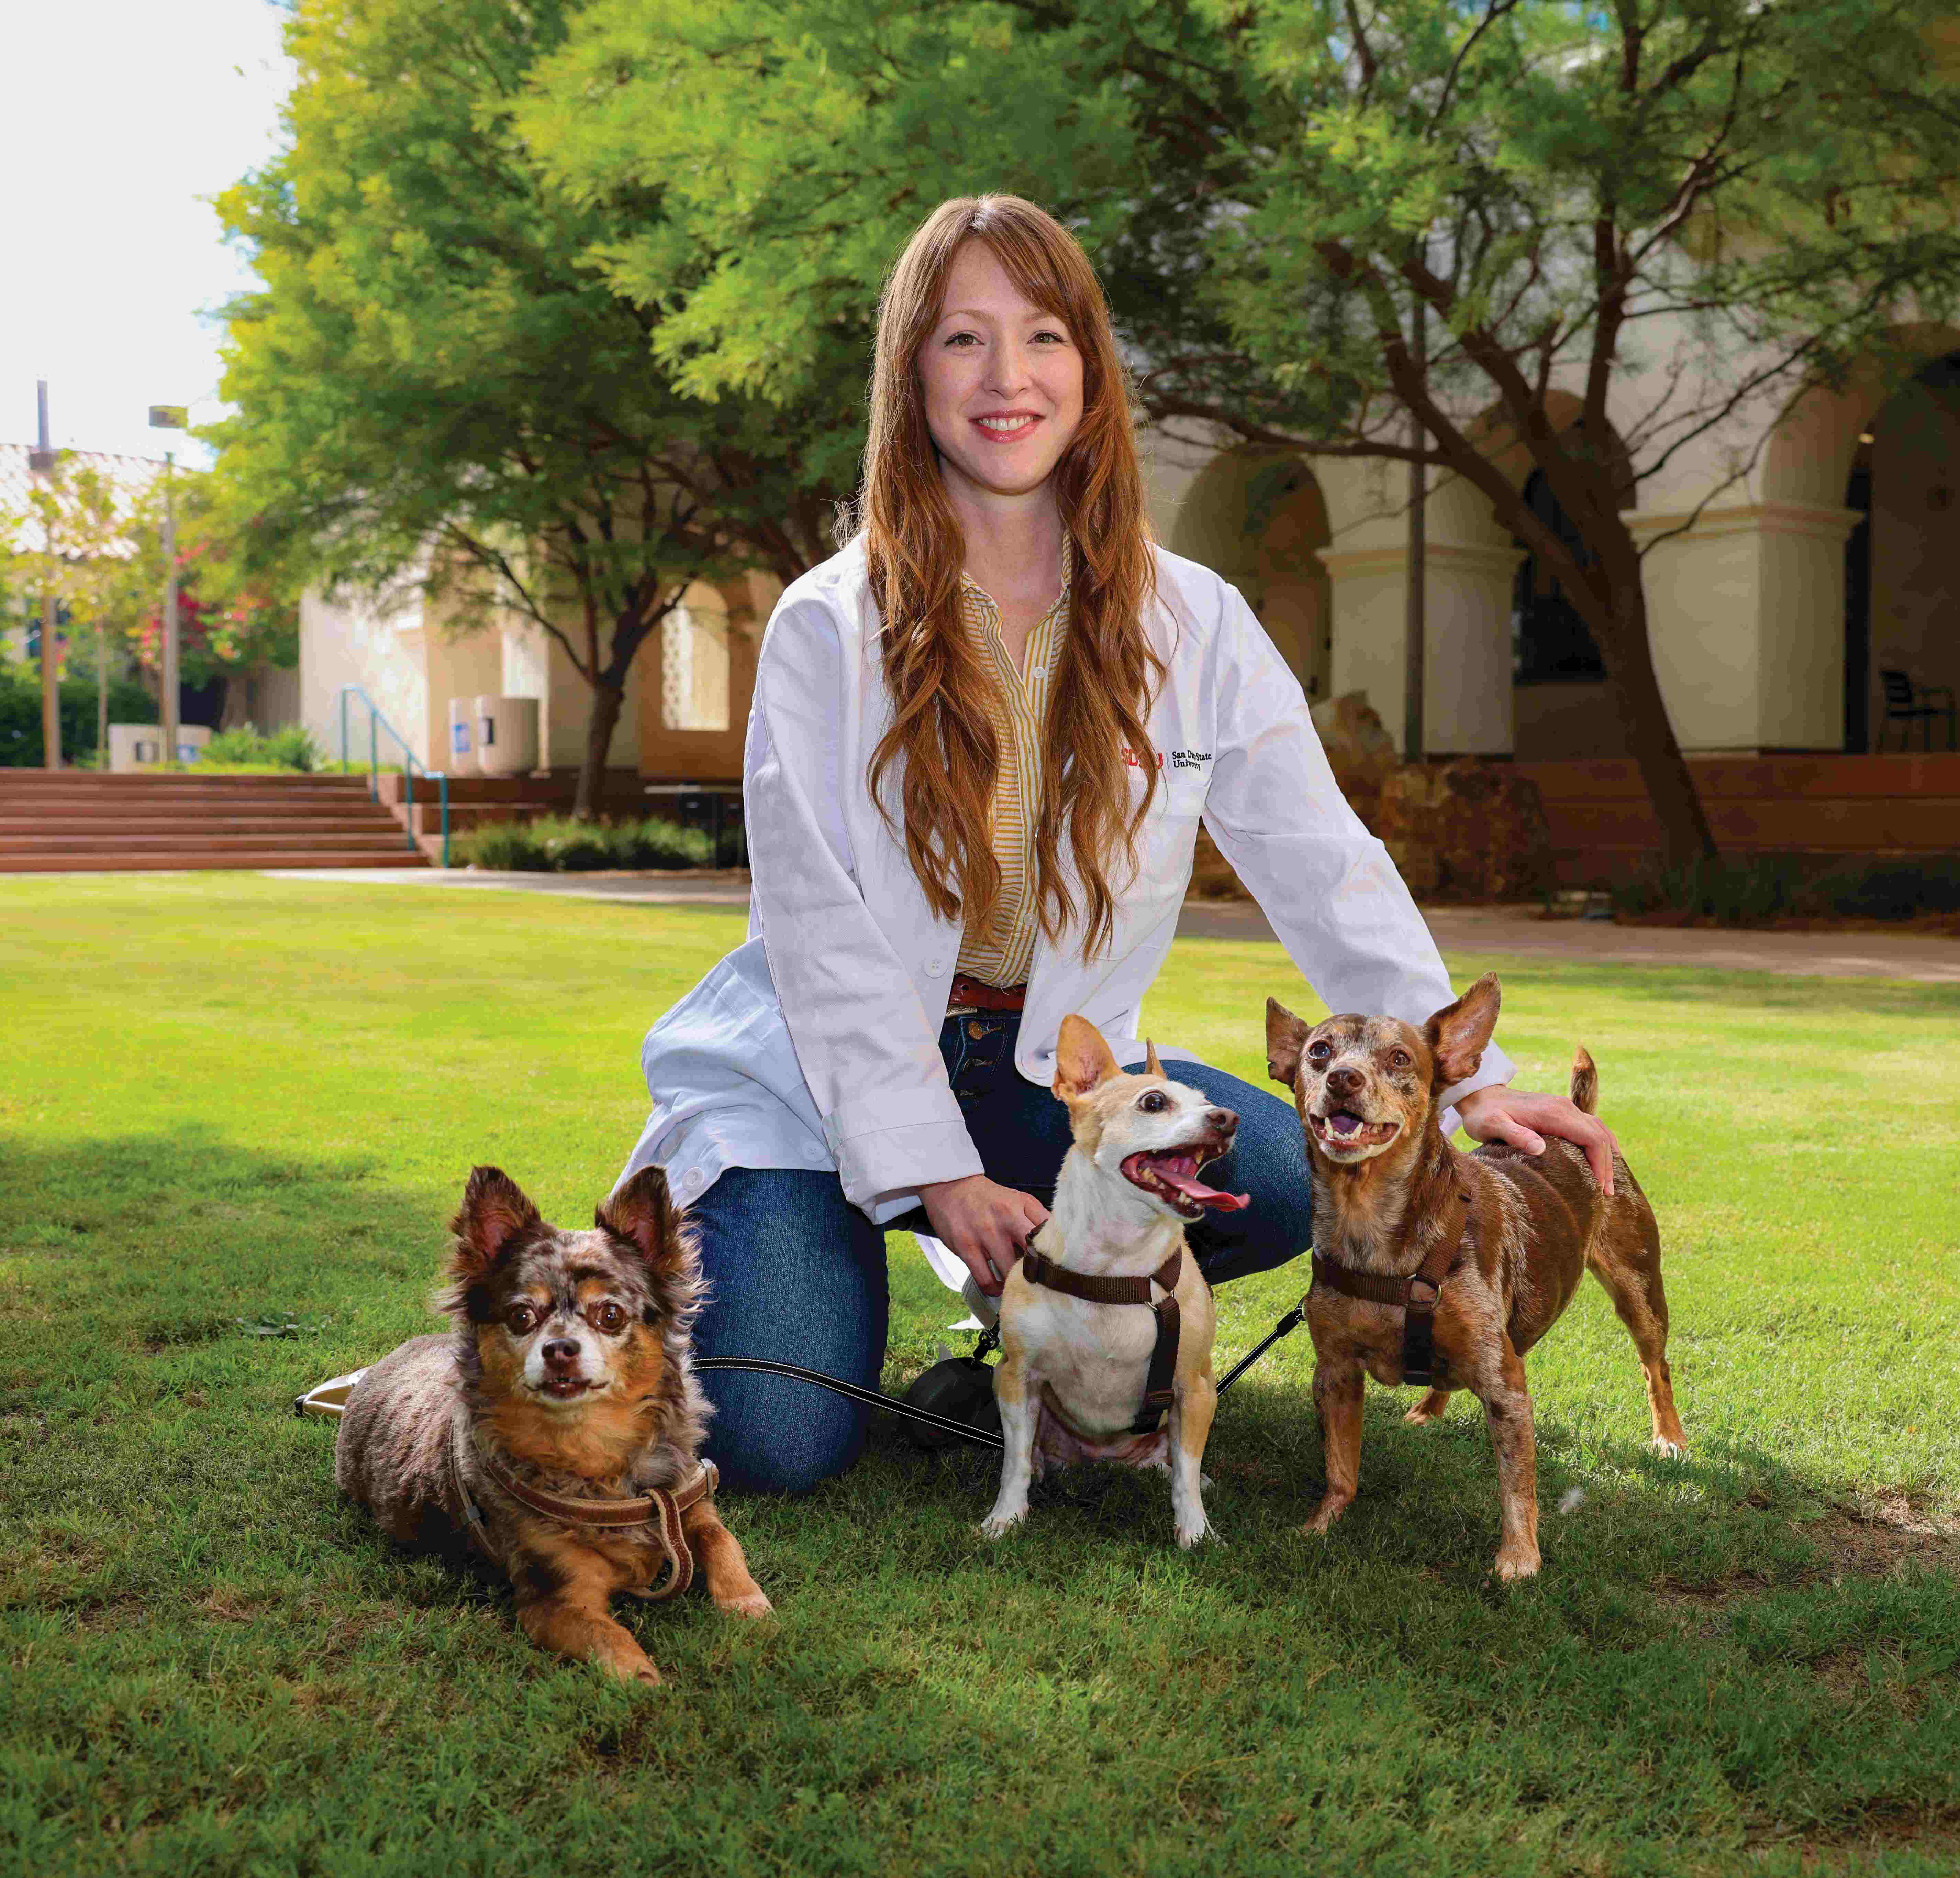 A photo of Lilith with 3 dogs